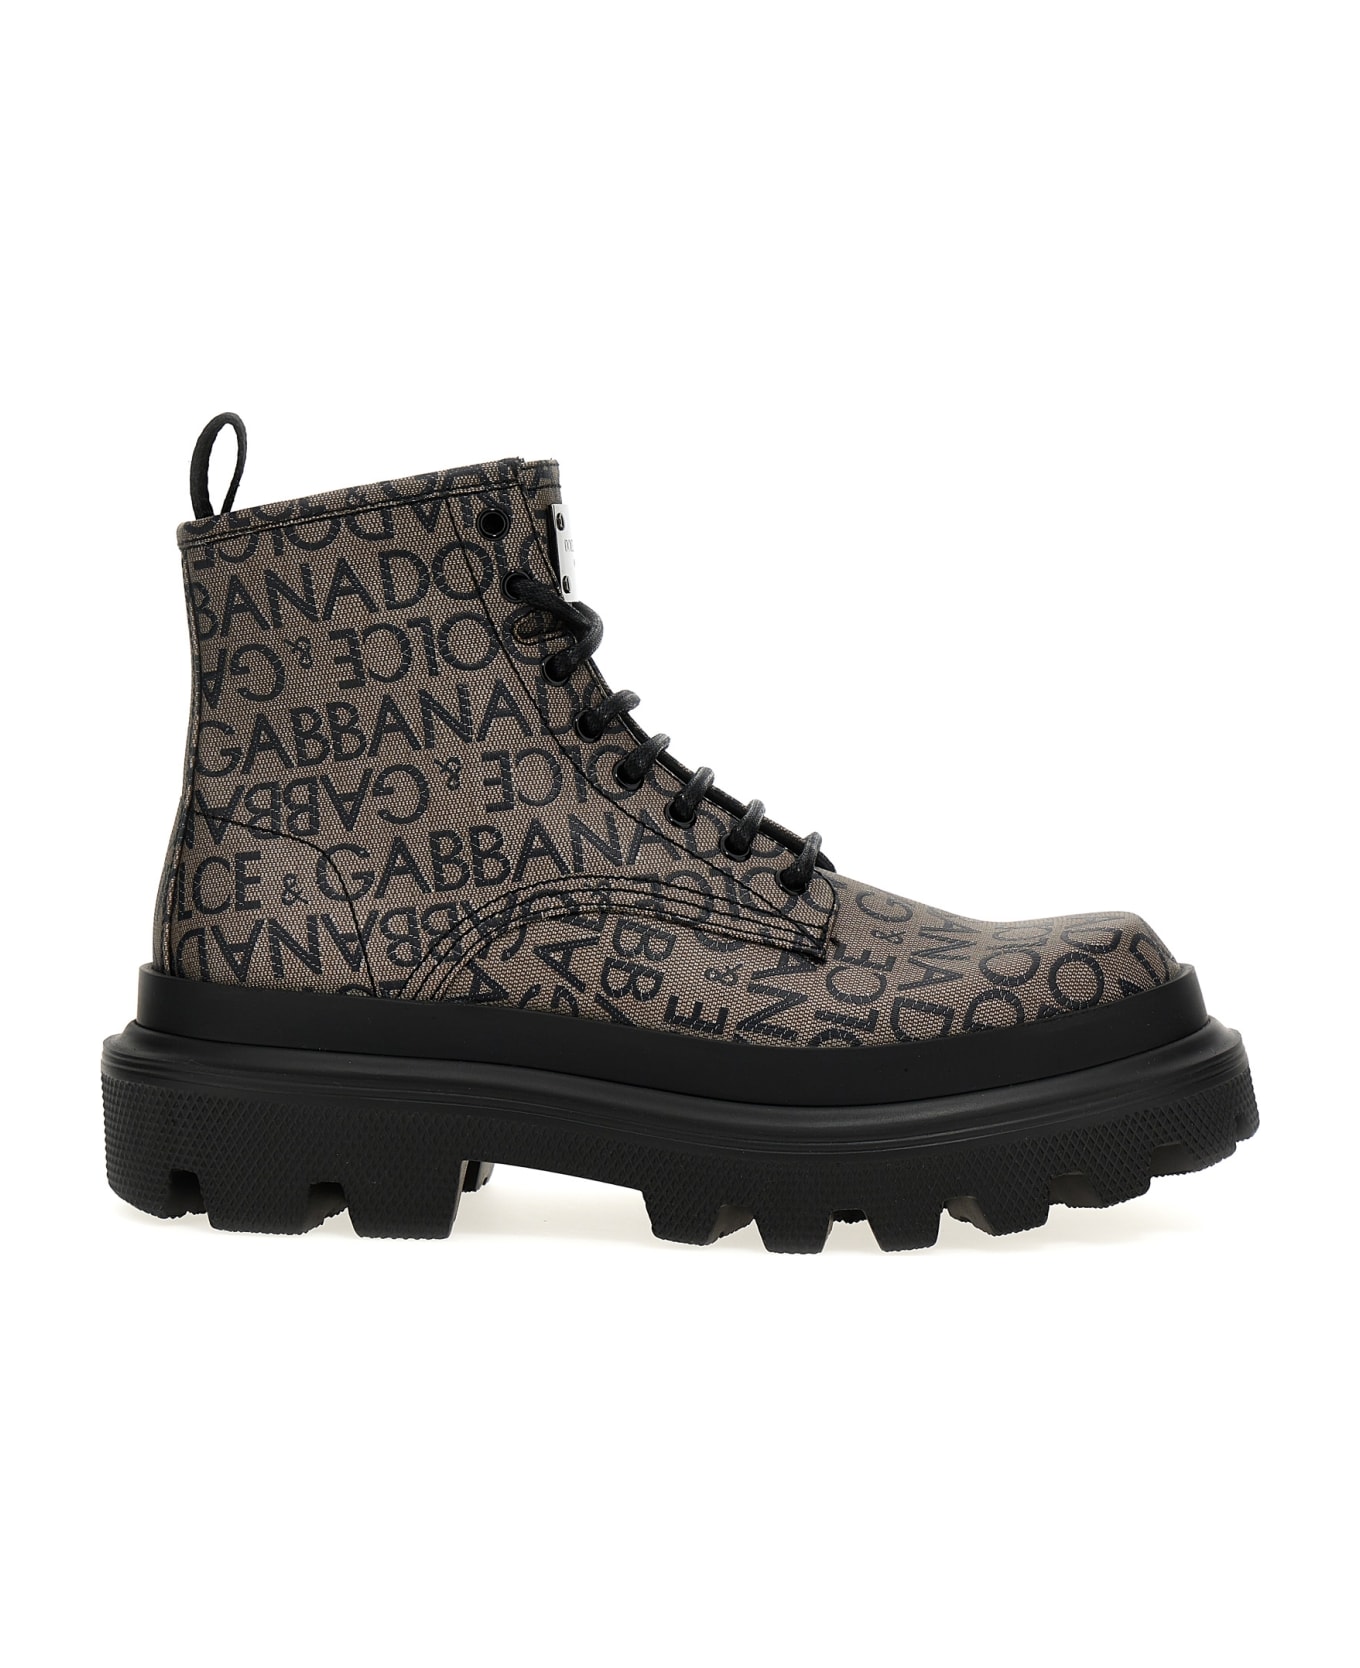 Dolce & Gabbana Jacquard Logo Combat Boots - Rounded-toe sneaker constructed with protective toe-cap